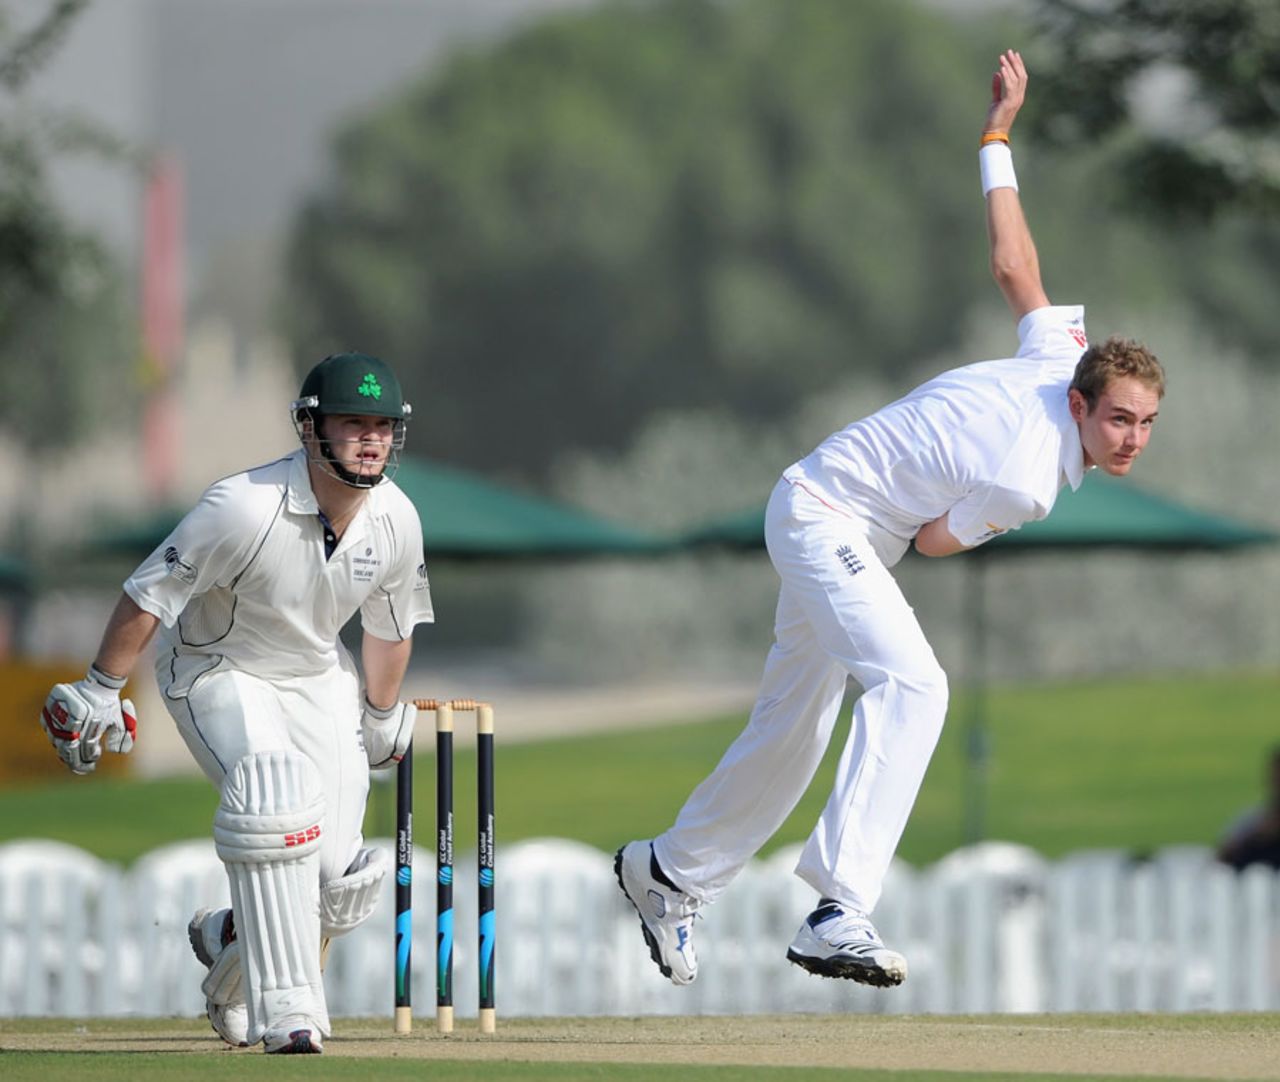 Stuart Broad bowling on the first day of England's UAE tour, ICC Combined XI v England XI, Dubai, 1st day, January 7, 2012